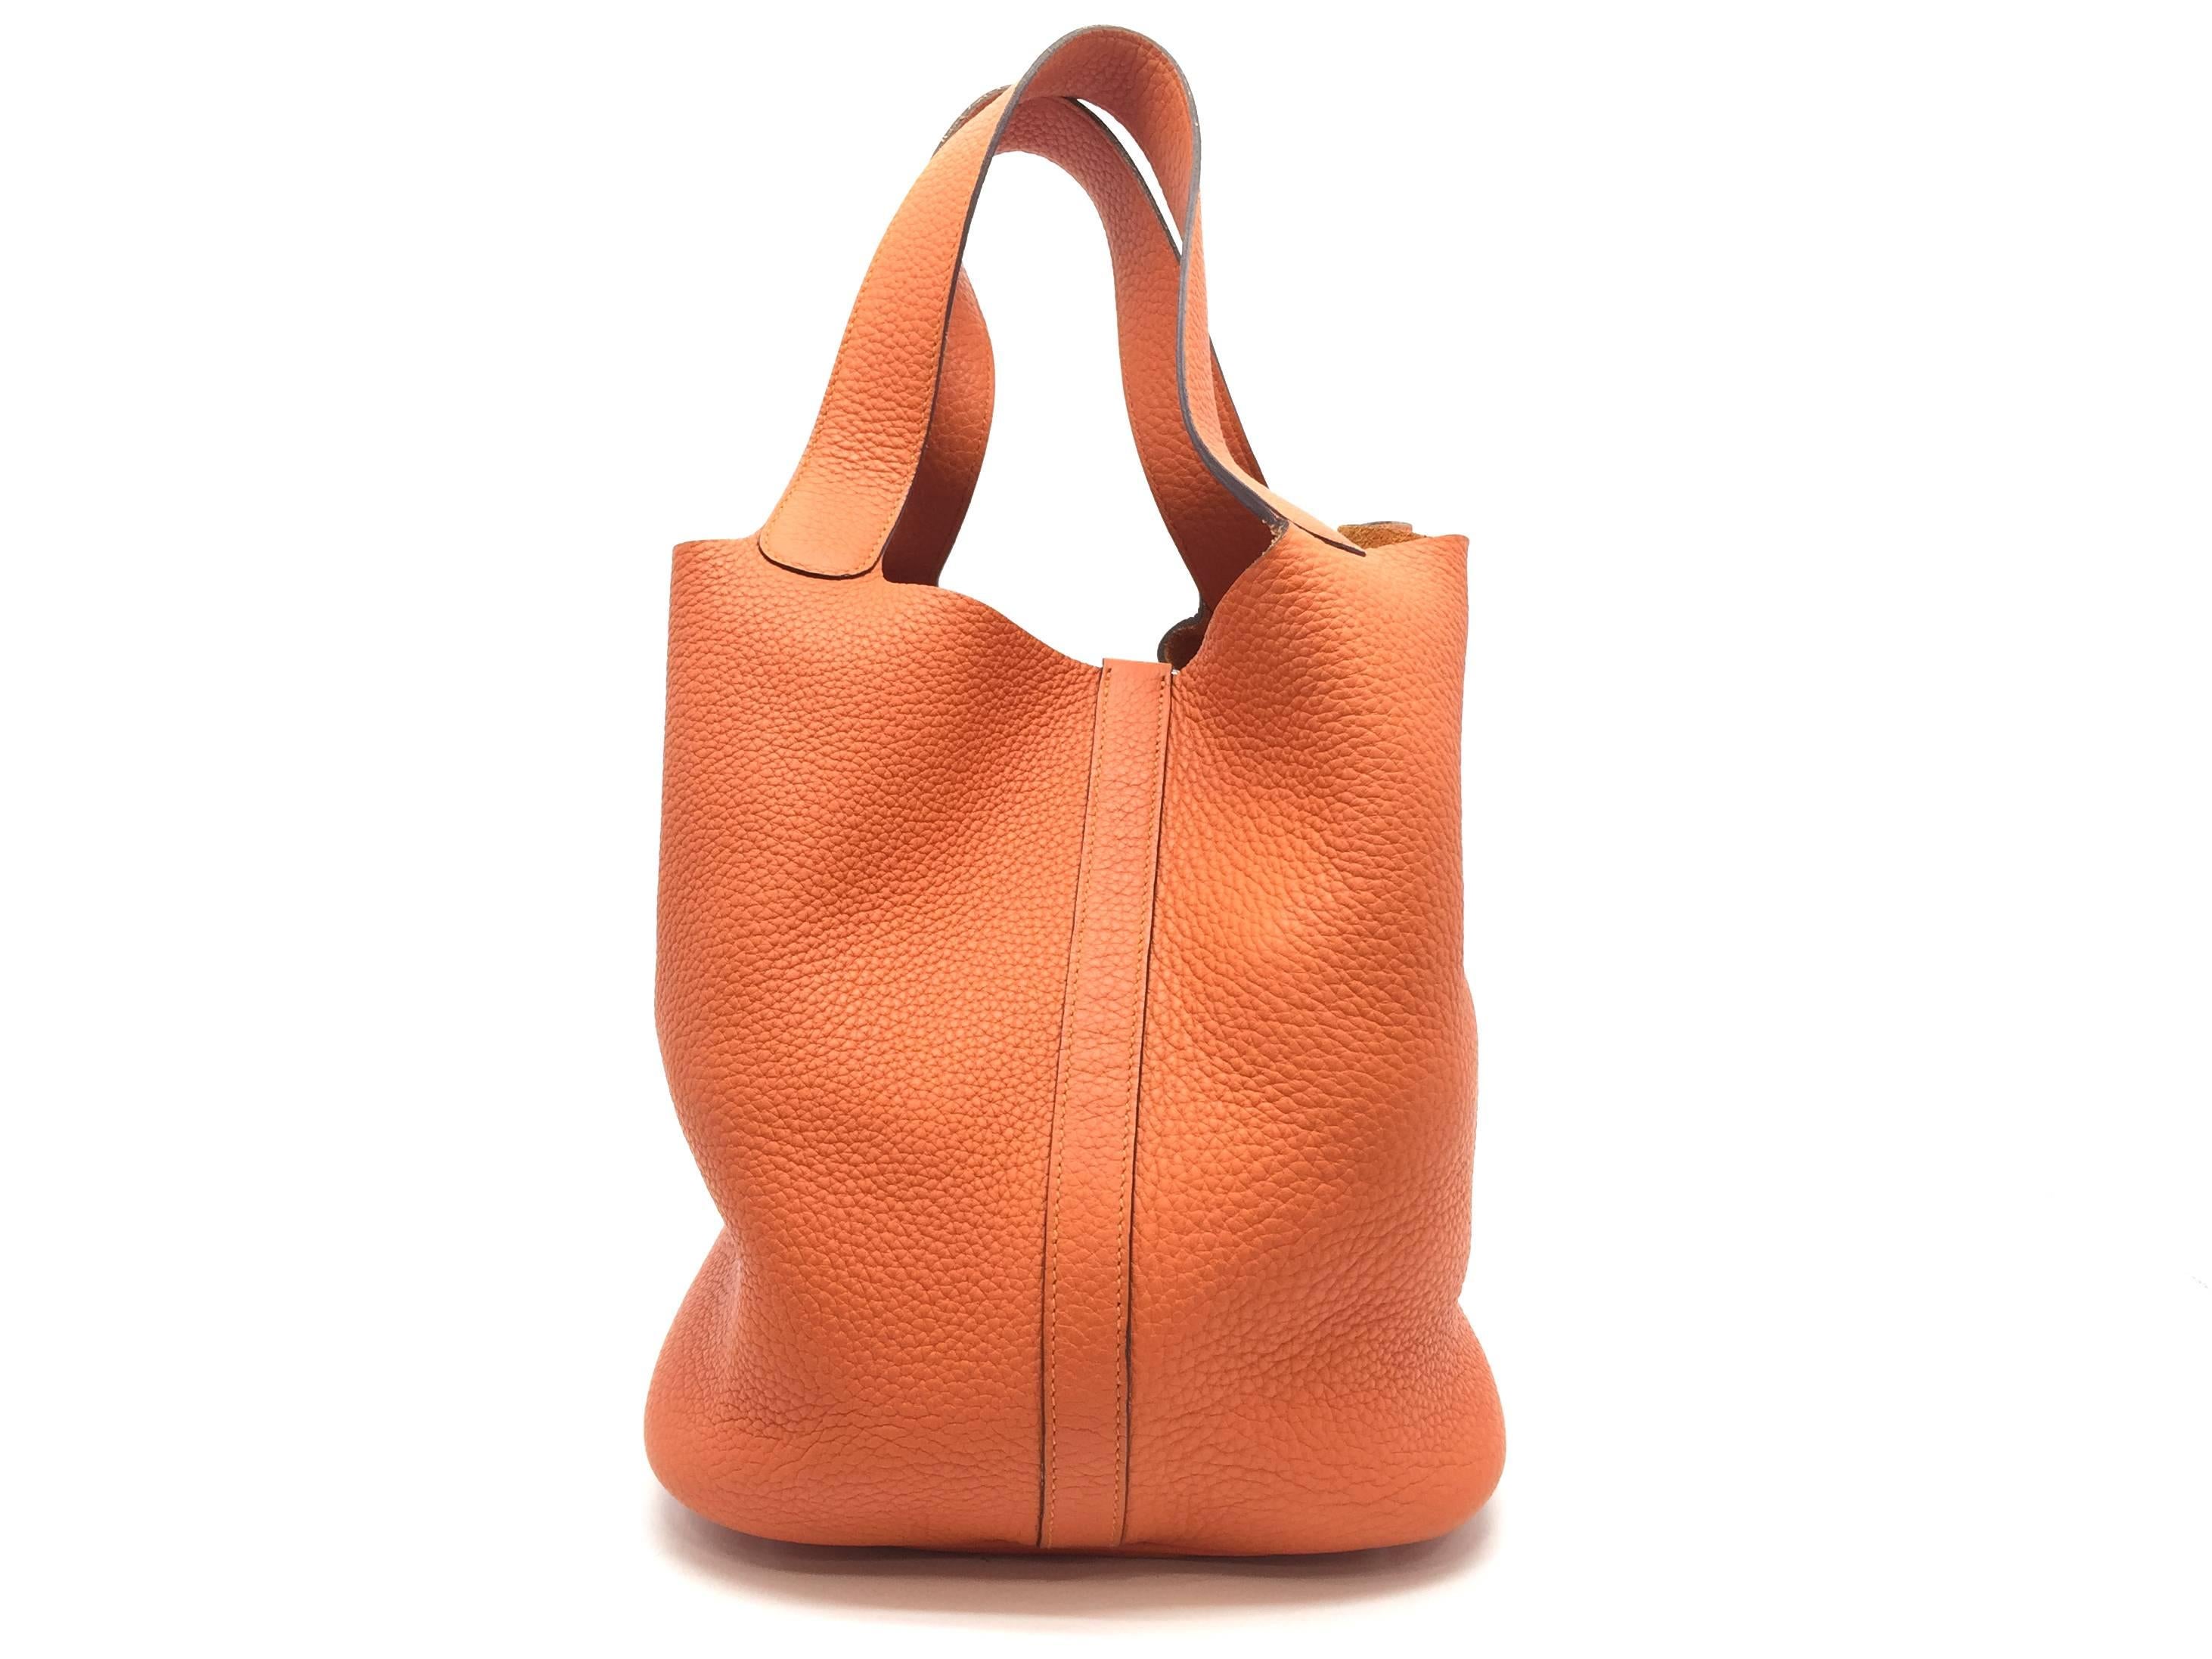 Color: Orange / Feu (designer color)
Material: Clemence Leather

Condition:
Rank A
Overall: Good, few minor defects
Surface: Good
Corners: Good
Edges: Minor Scratches
Handles/Straps: Minor Scratches
Hardware: Minor Scratches &